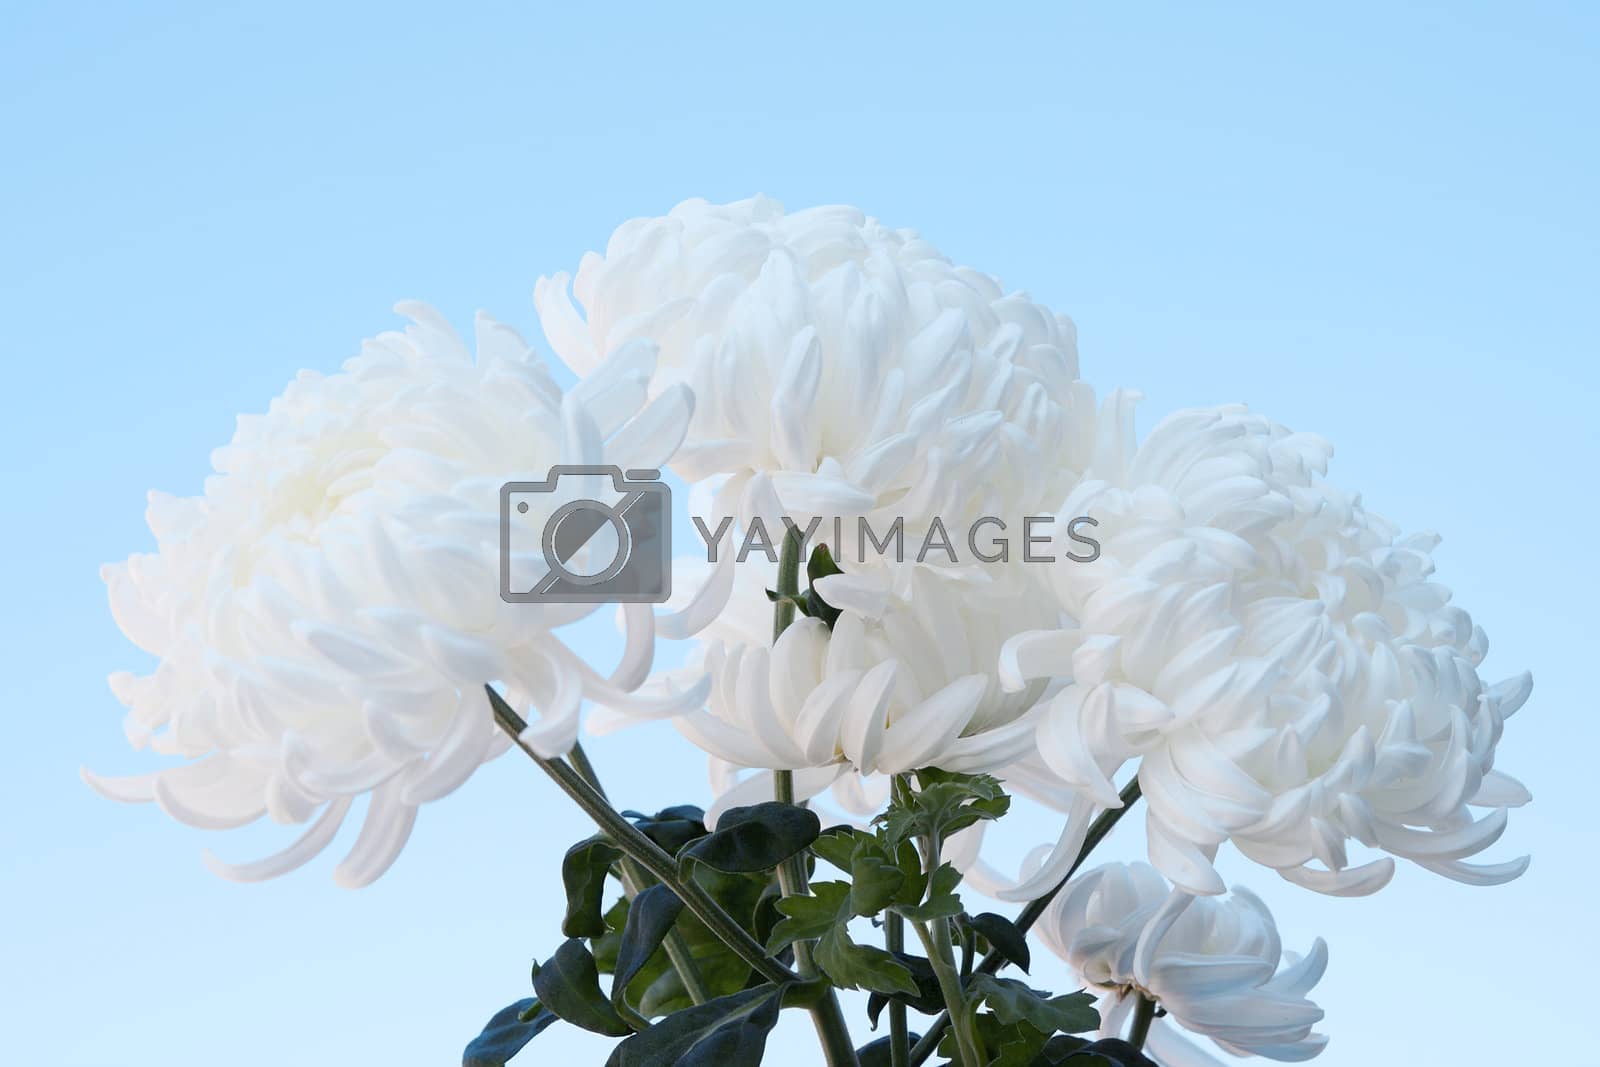 Royalty free image of White fluffy chrysanthemums by sever180